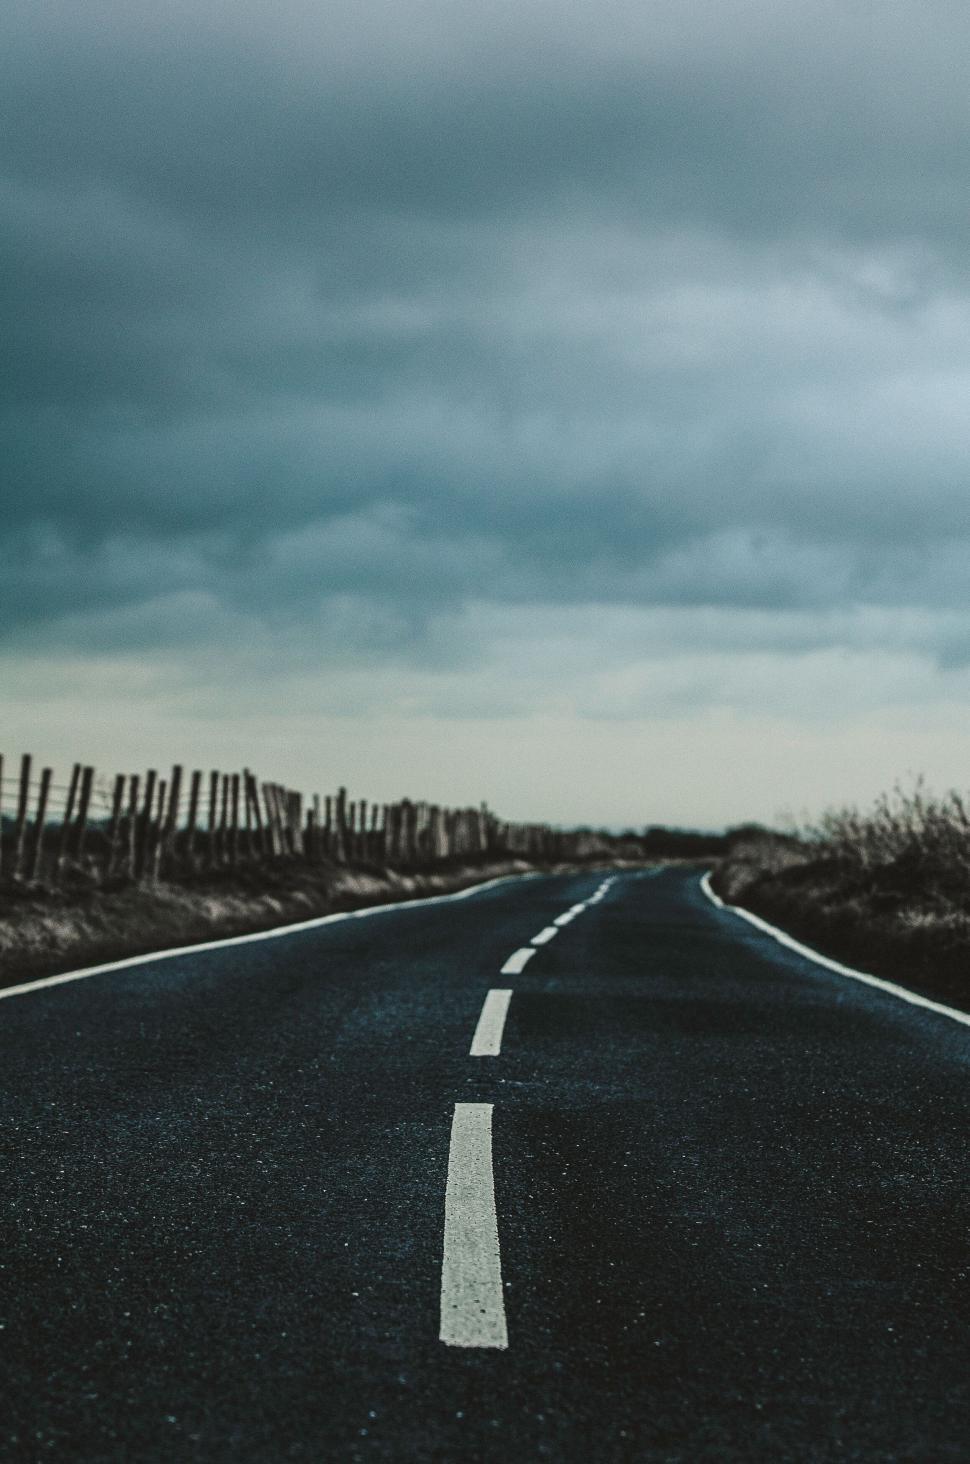 Free Image of Desolate country road under stormy skies 